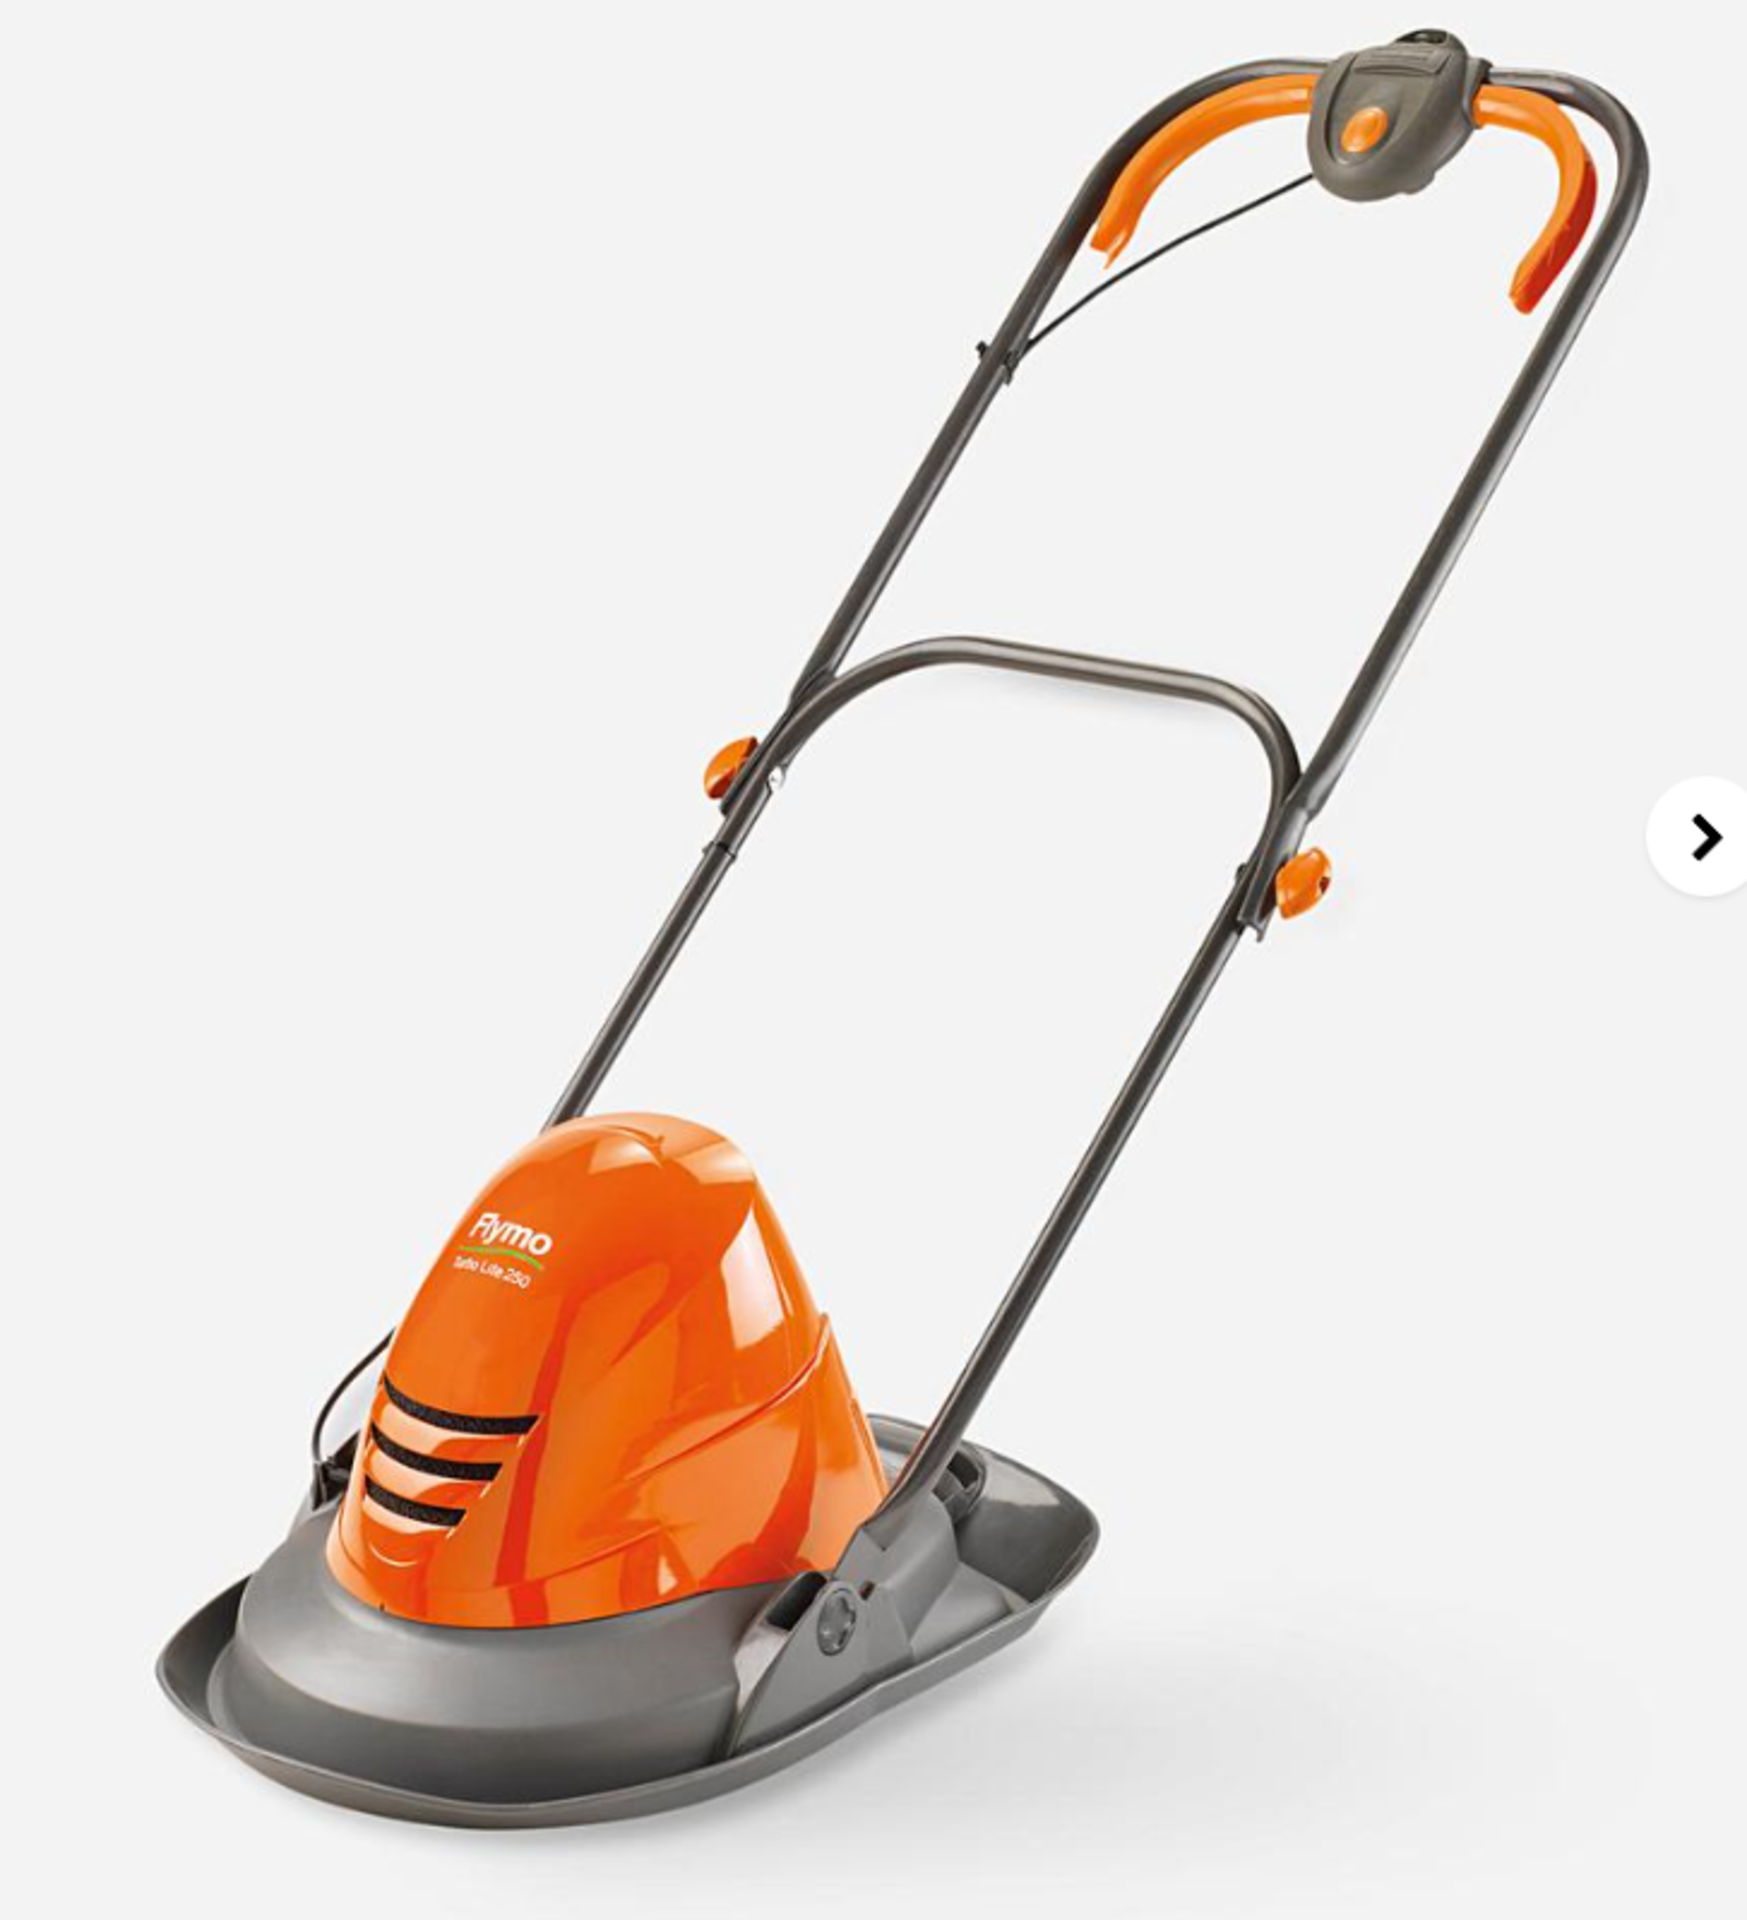 Flymo TurboLite 250 Hover Corded Lawnmower. - ER22. The TurboLite 250 is a small and lightweight